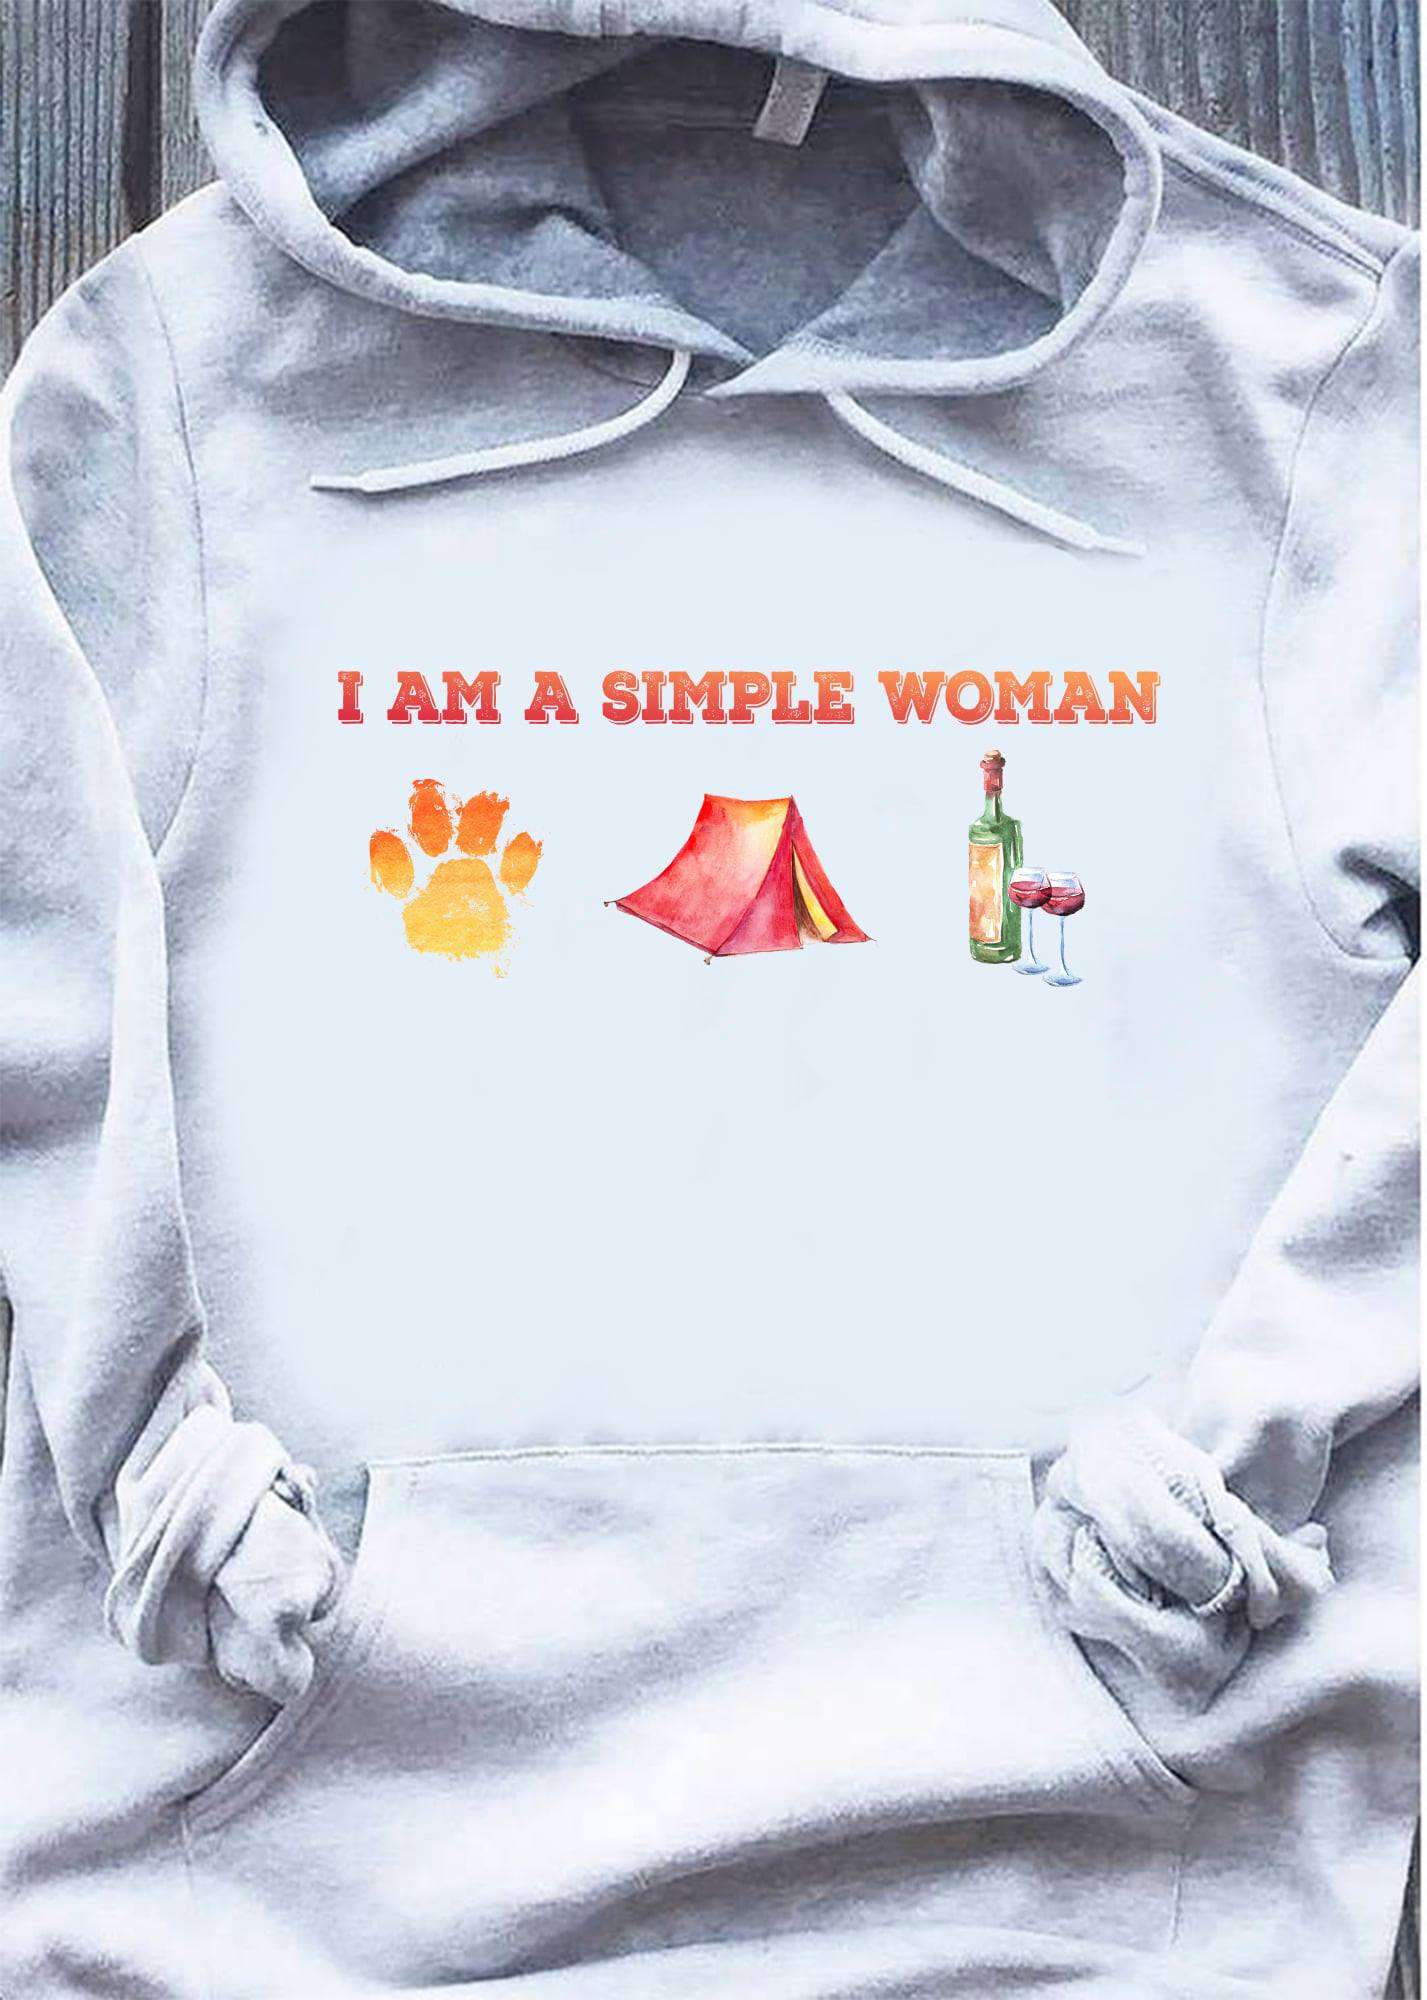 I am a simple woman - Gift for woman camper, dog and wine